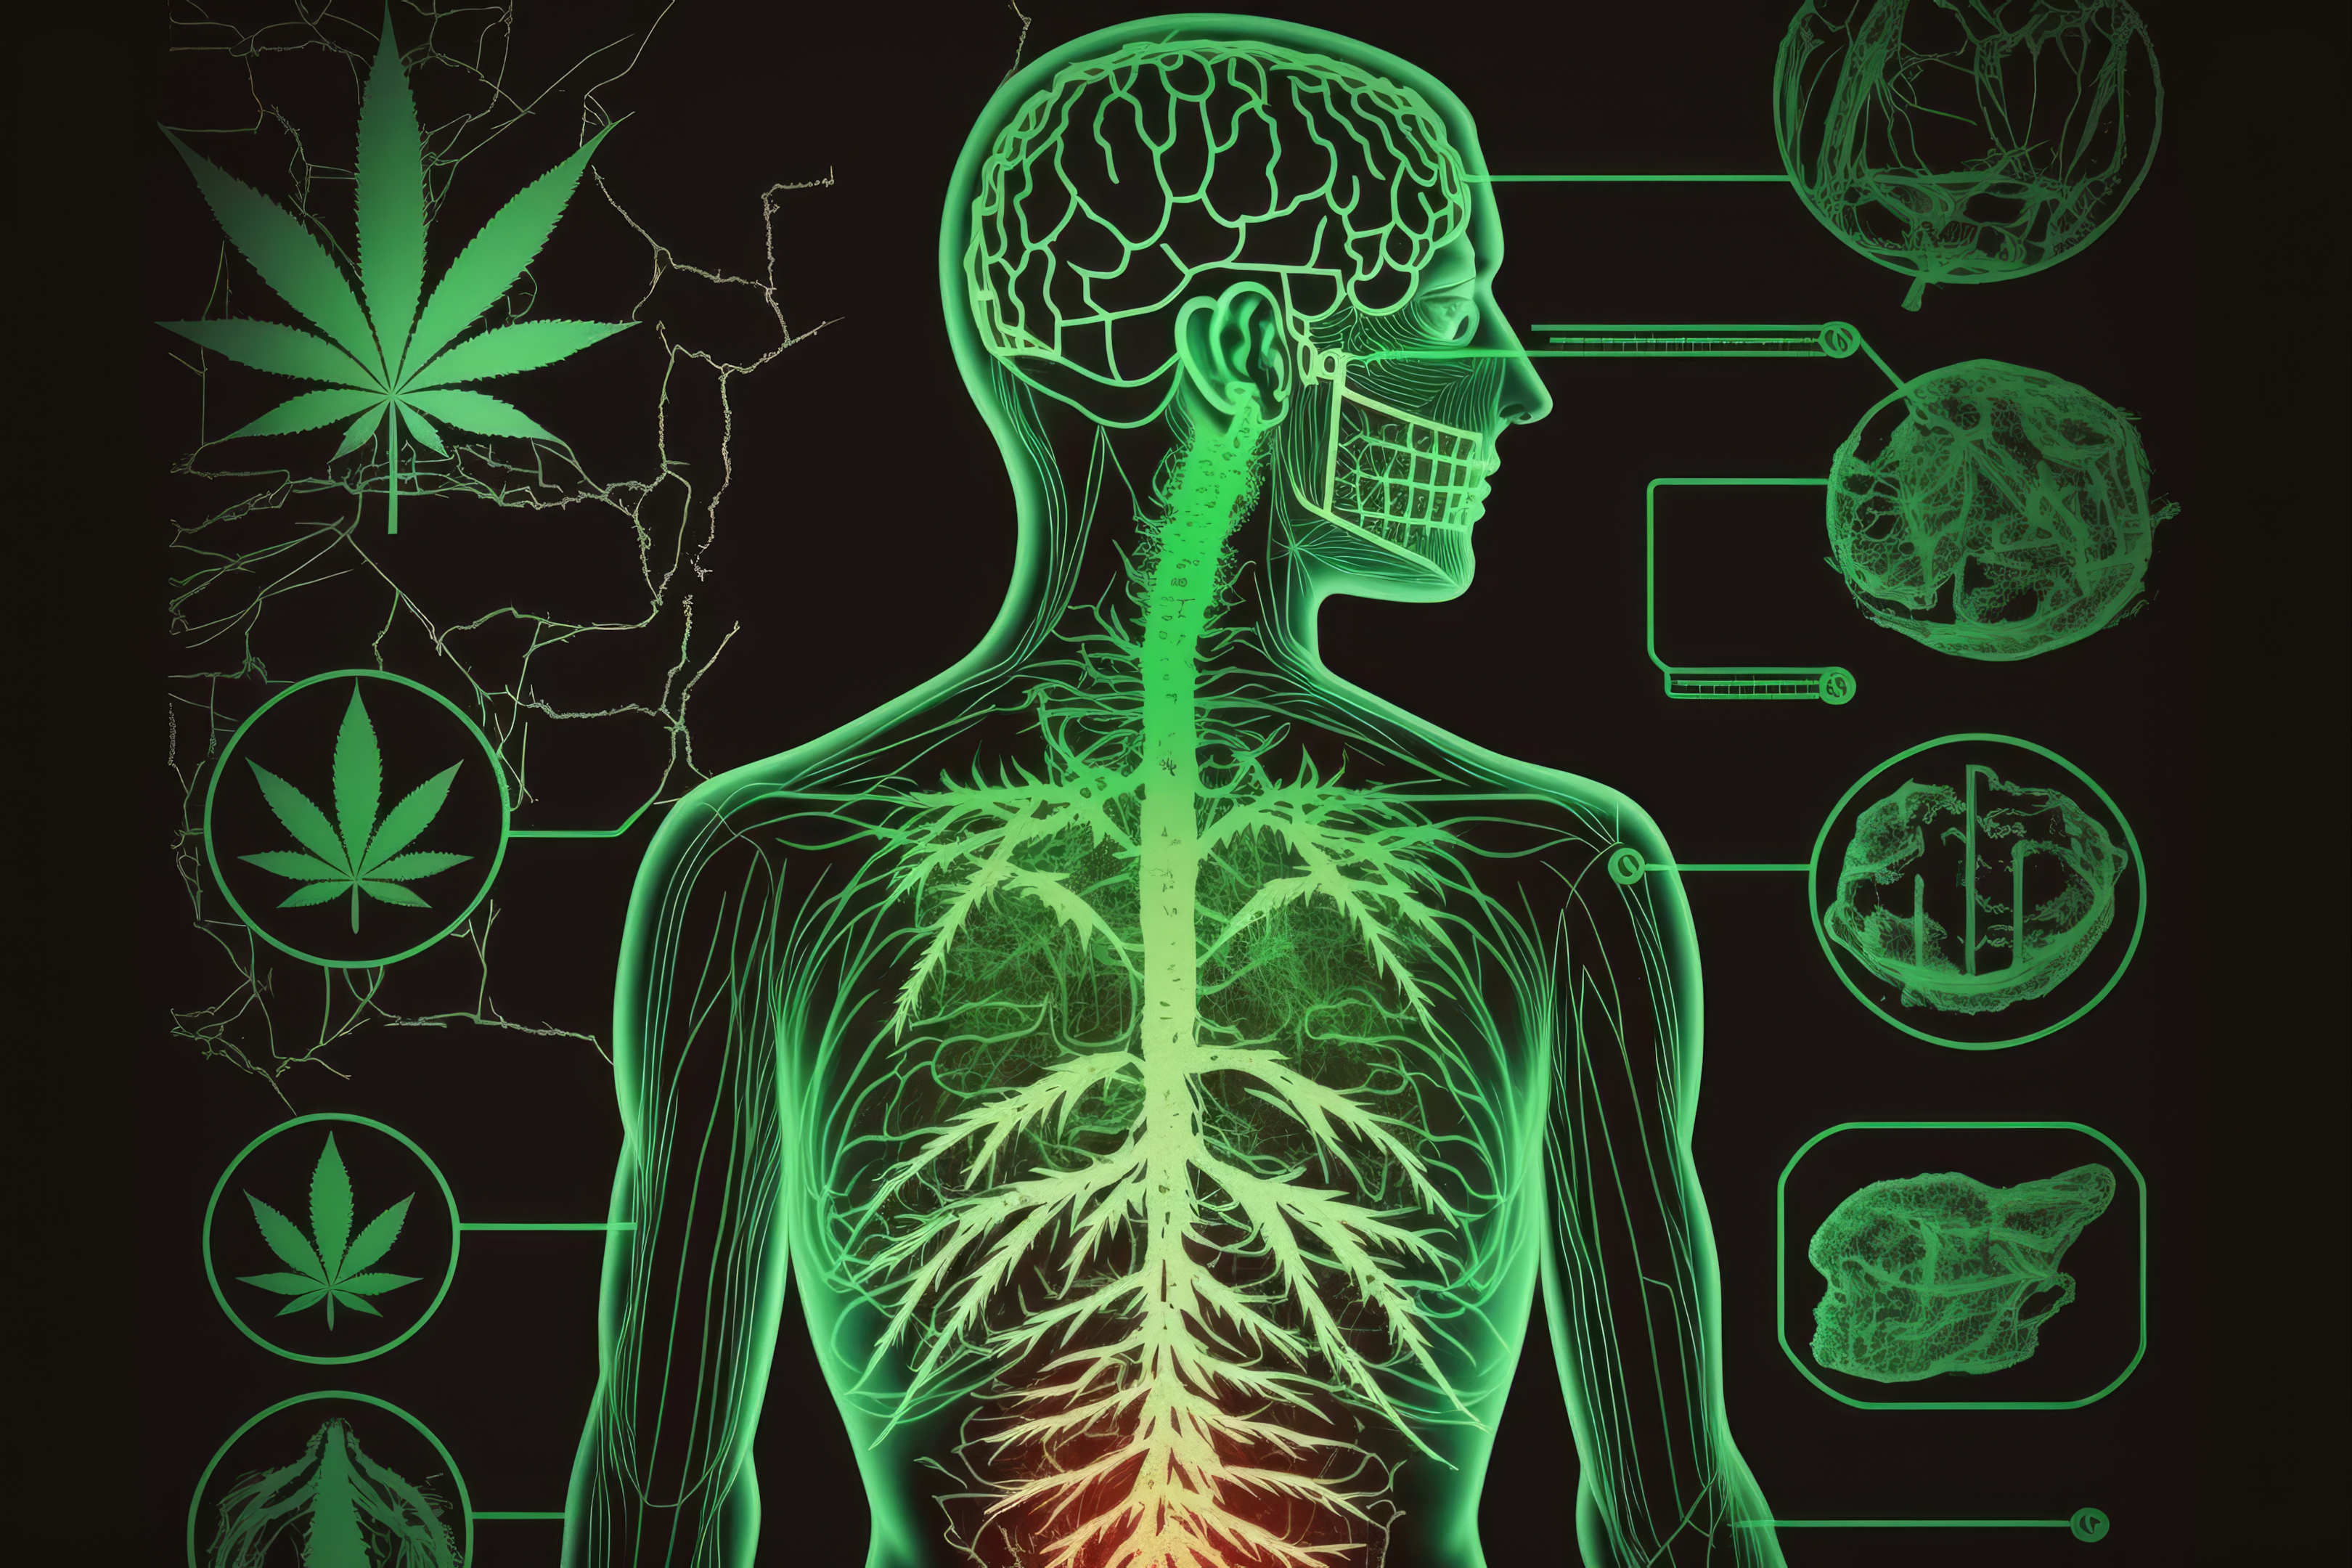 CBD tinctures, and CBD products in general, can interact with the cannabinoid receptors in our endocannabinoid system. This system helps regulate normal bodily functions.